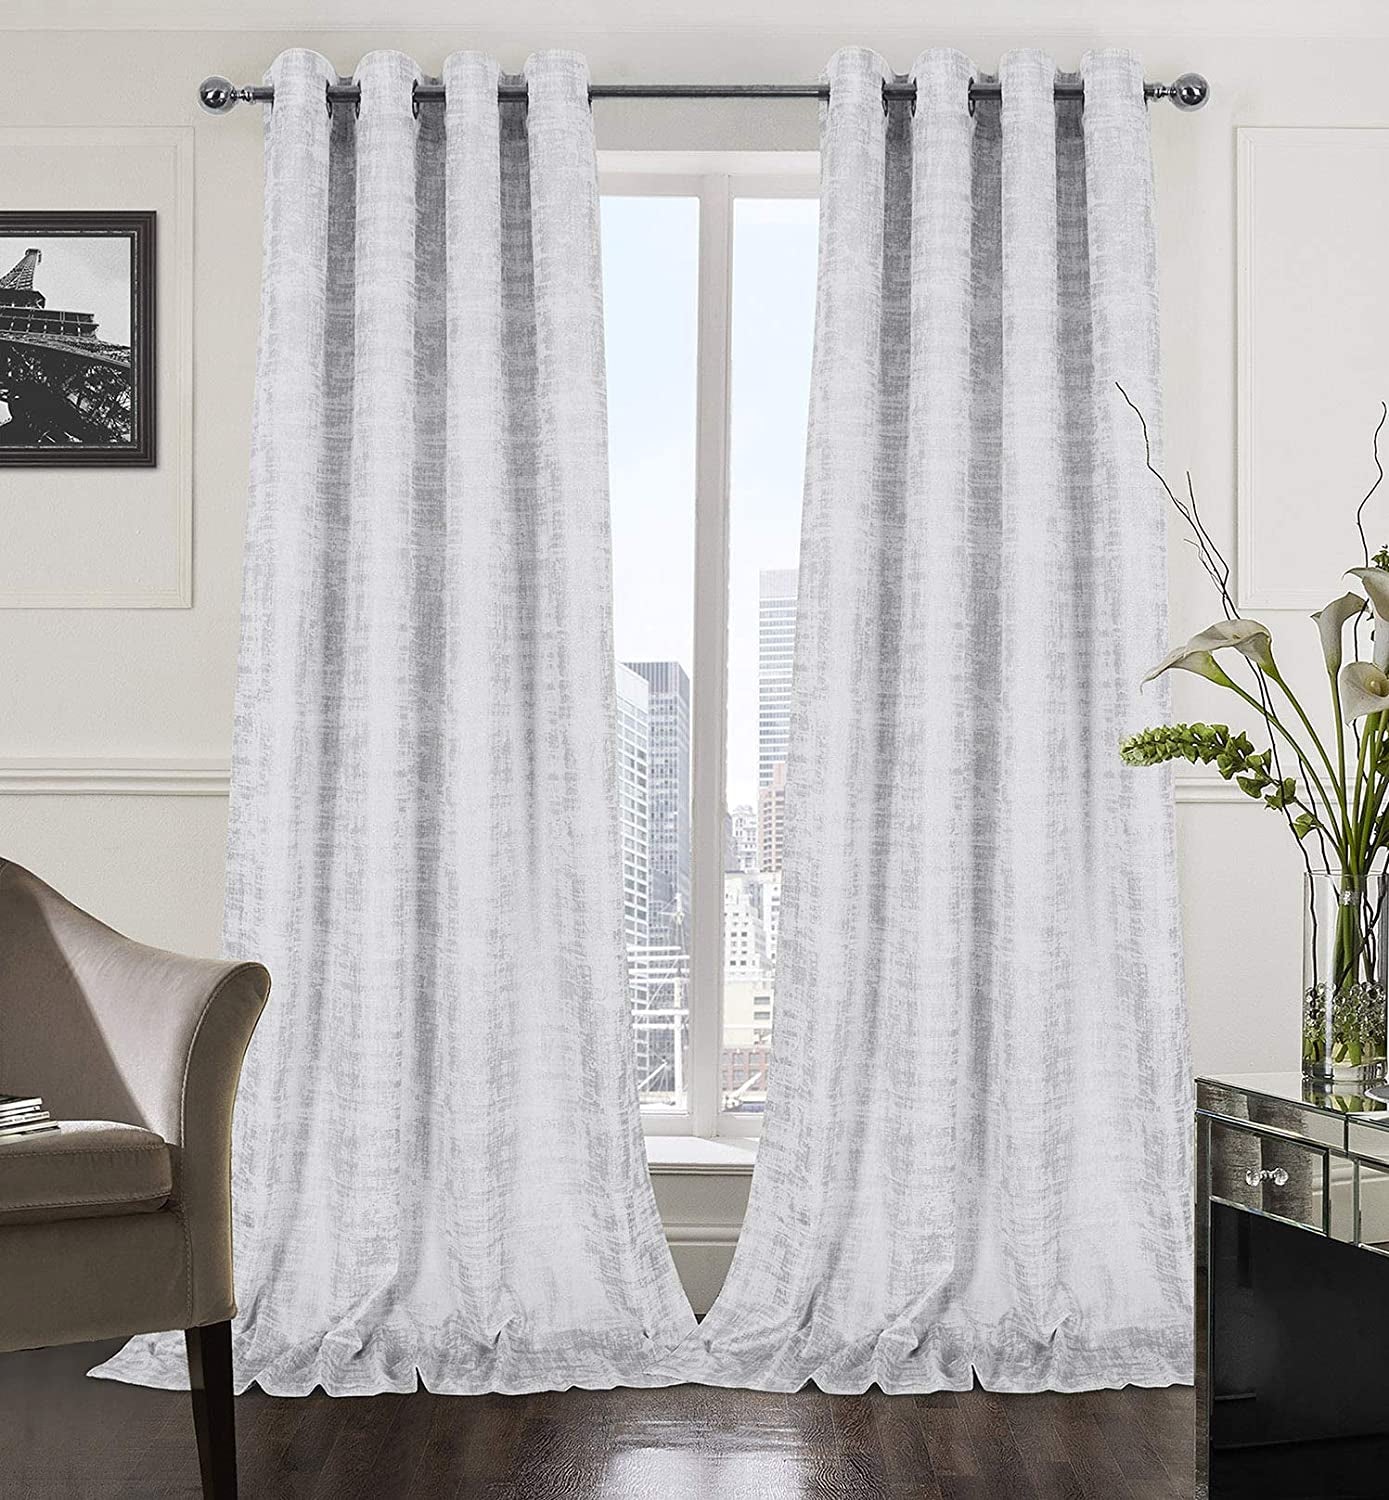 Always4U Soft Velvet Curtains 95 Inch Length Luxury Bedroom Curtains Gold Foil Print Window Curtains for Living Room 1 Panel White  always4u White (Silver Print) 2 Panels: 52''W*108''L 